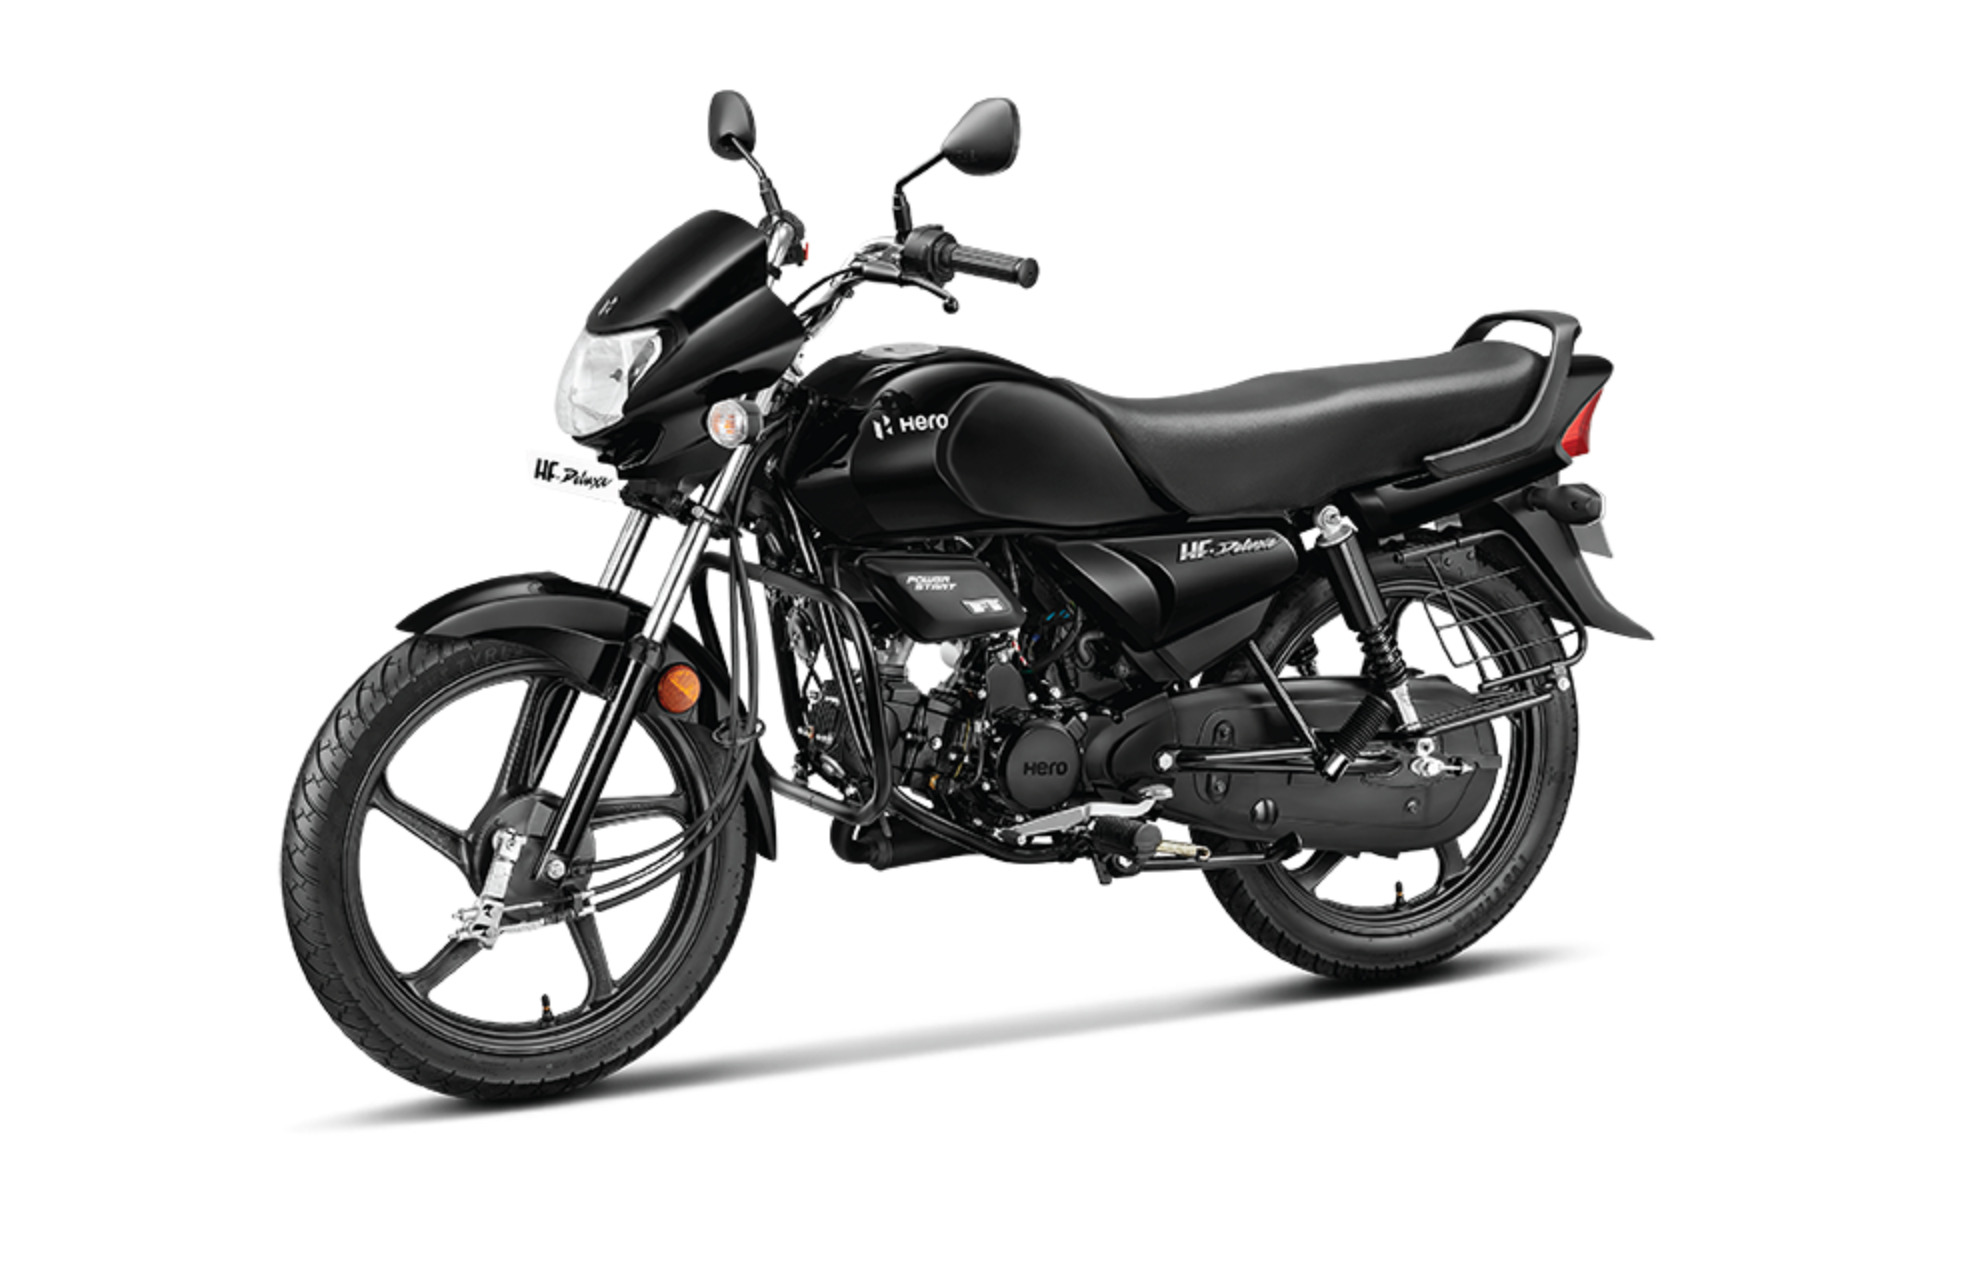 New All-Black Hero HF Deluxe Launched in India at Rs 60,760 - picture